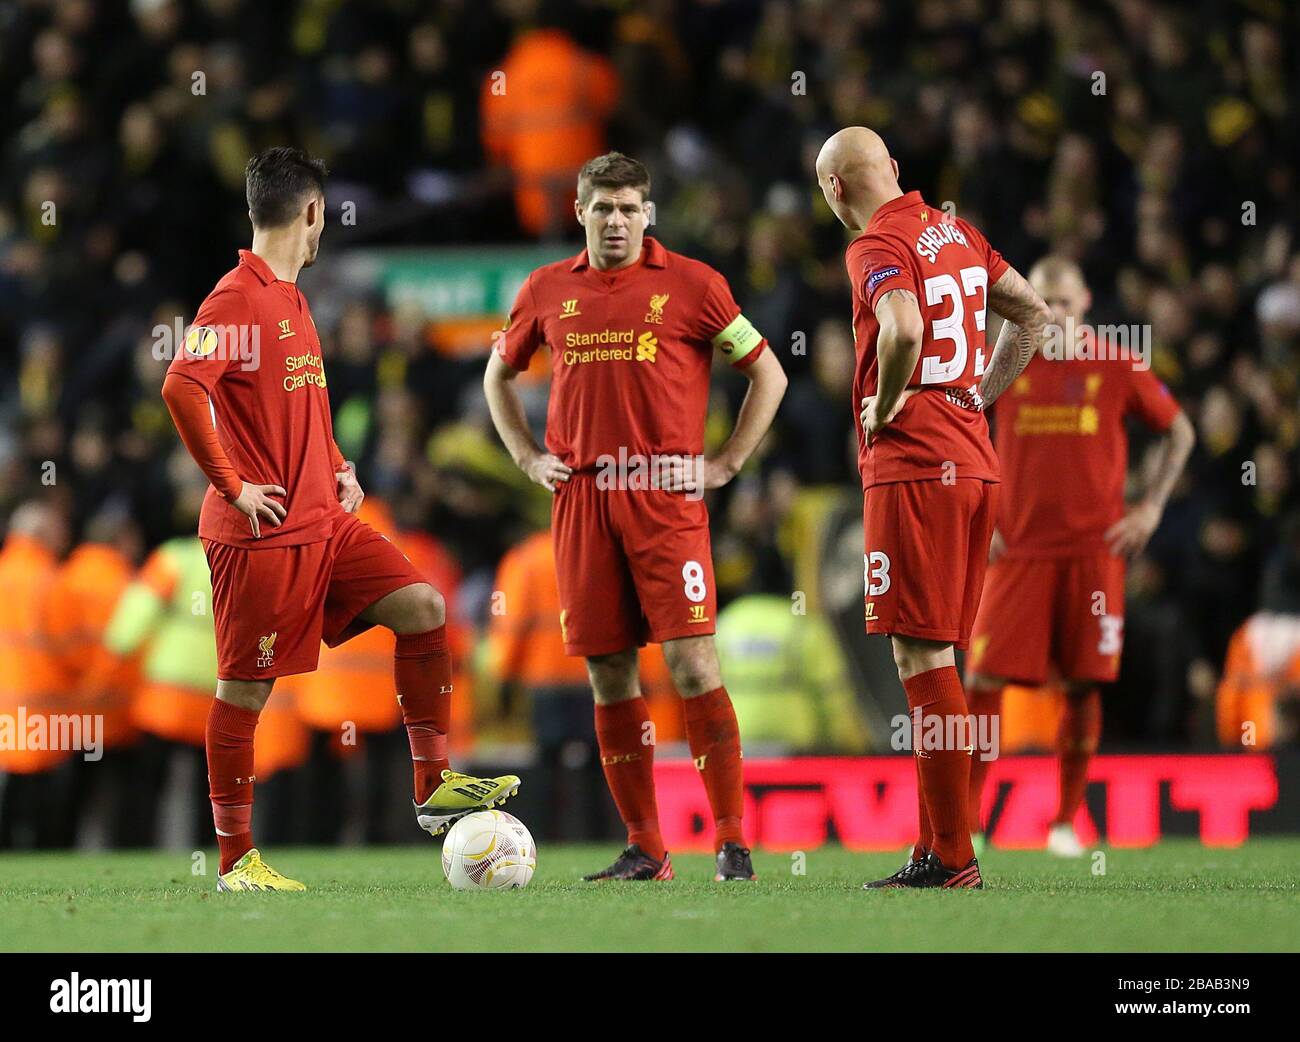 Liverpool's Steven Gerrard (centre), Jonjo Shelvey (right) and Jesus Fernandez Saez (left) wait to restart the match after Young Boy's Raul Marcelo Bobadilla (not in picture) scored his team's opening goal Stock Photo